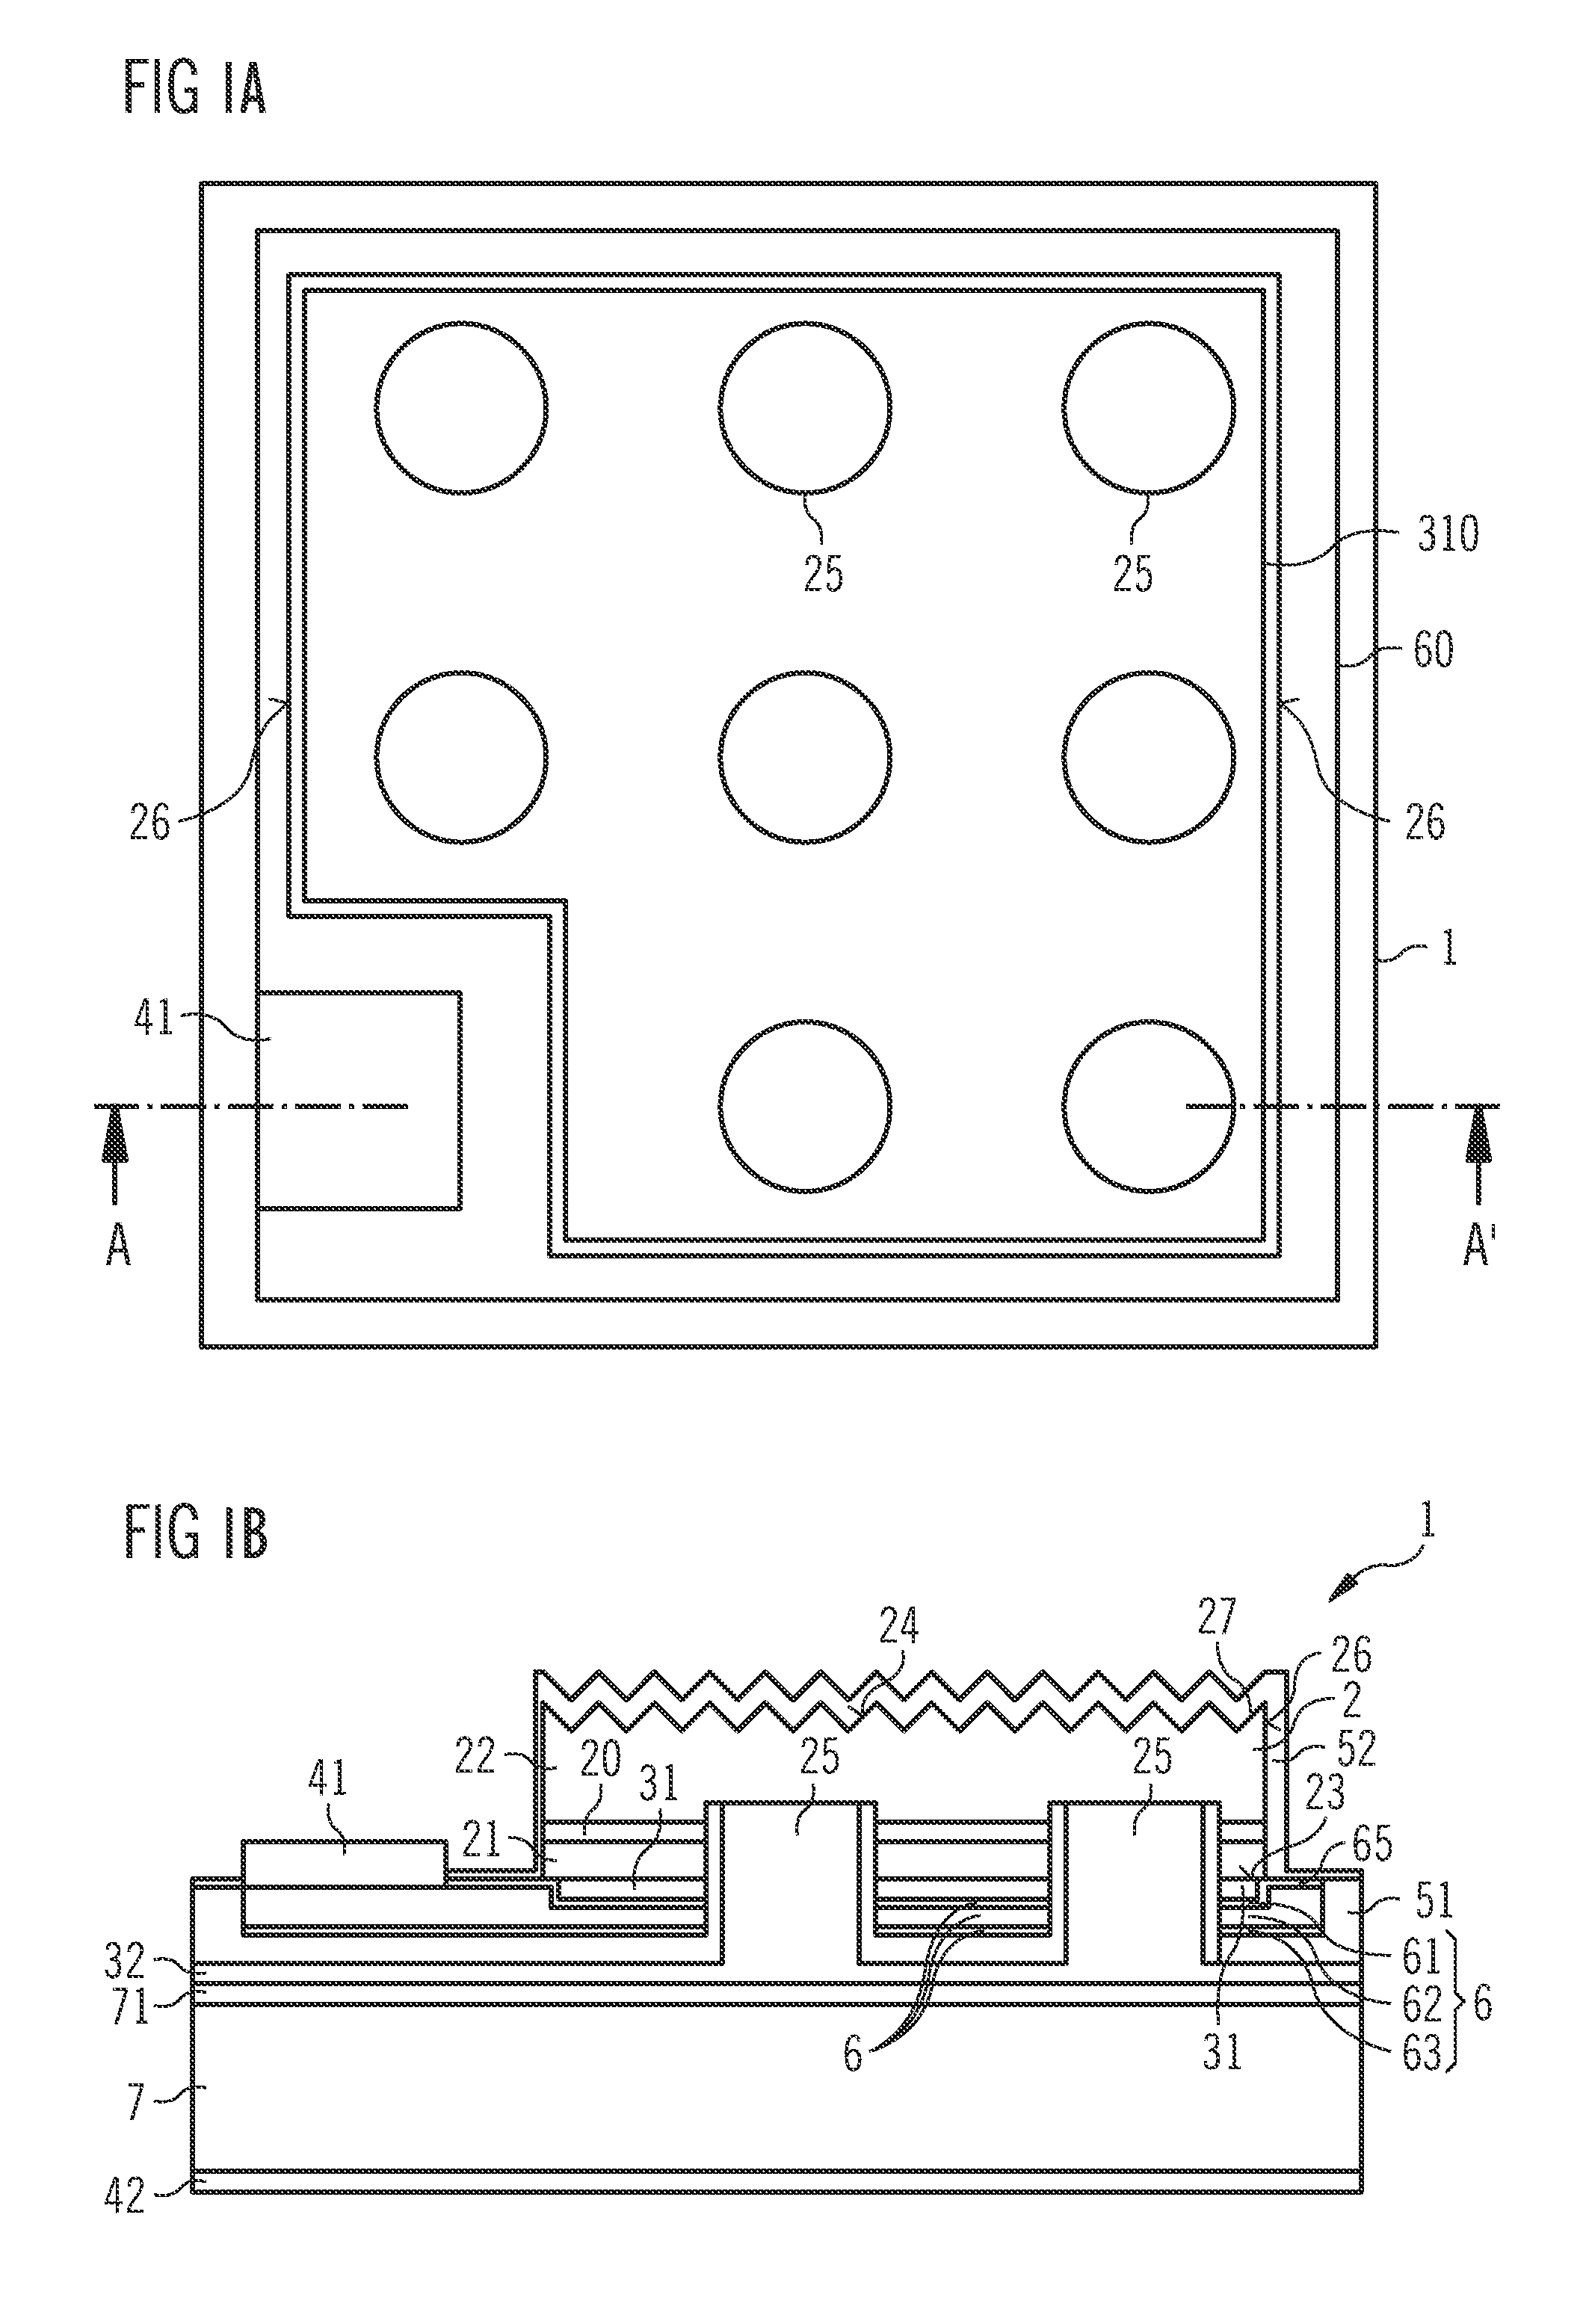 Optoelectronic Semiconductor Chip and Method for Producing Optoelectronic Semiconductor Chips